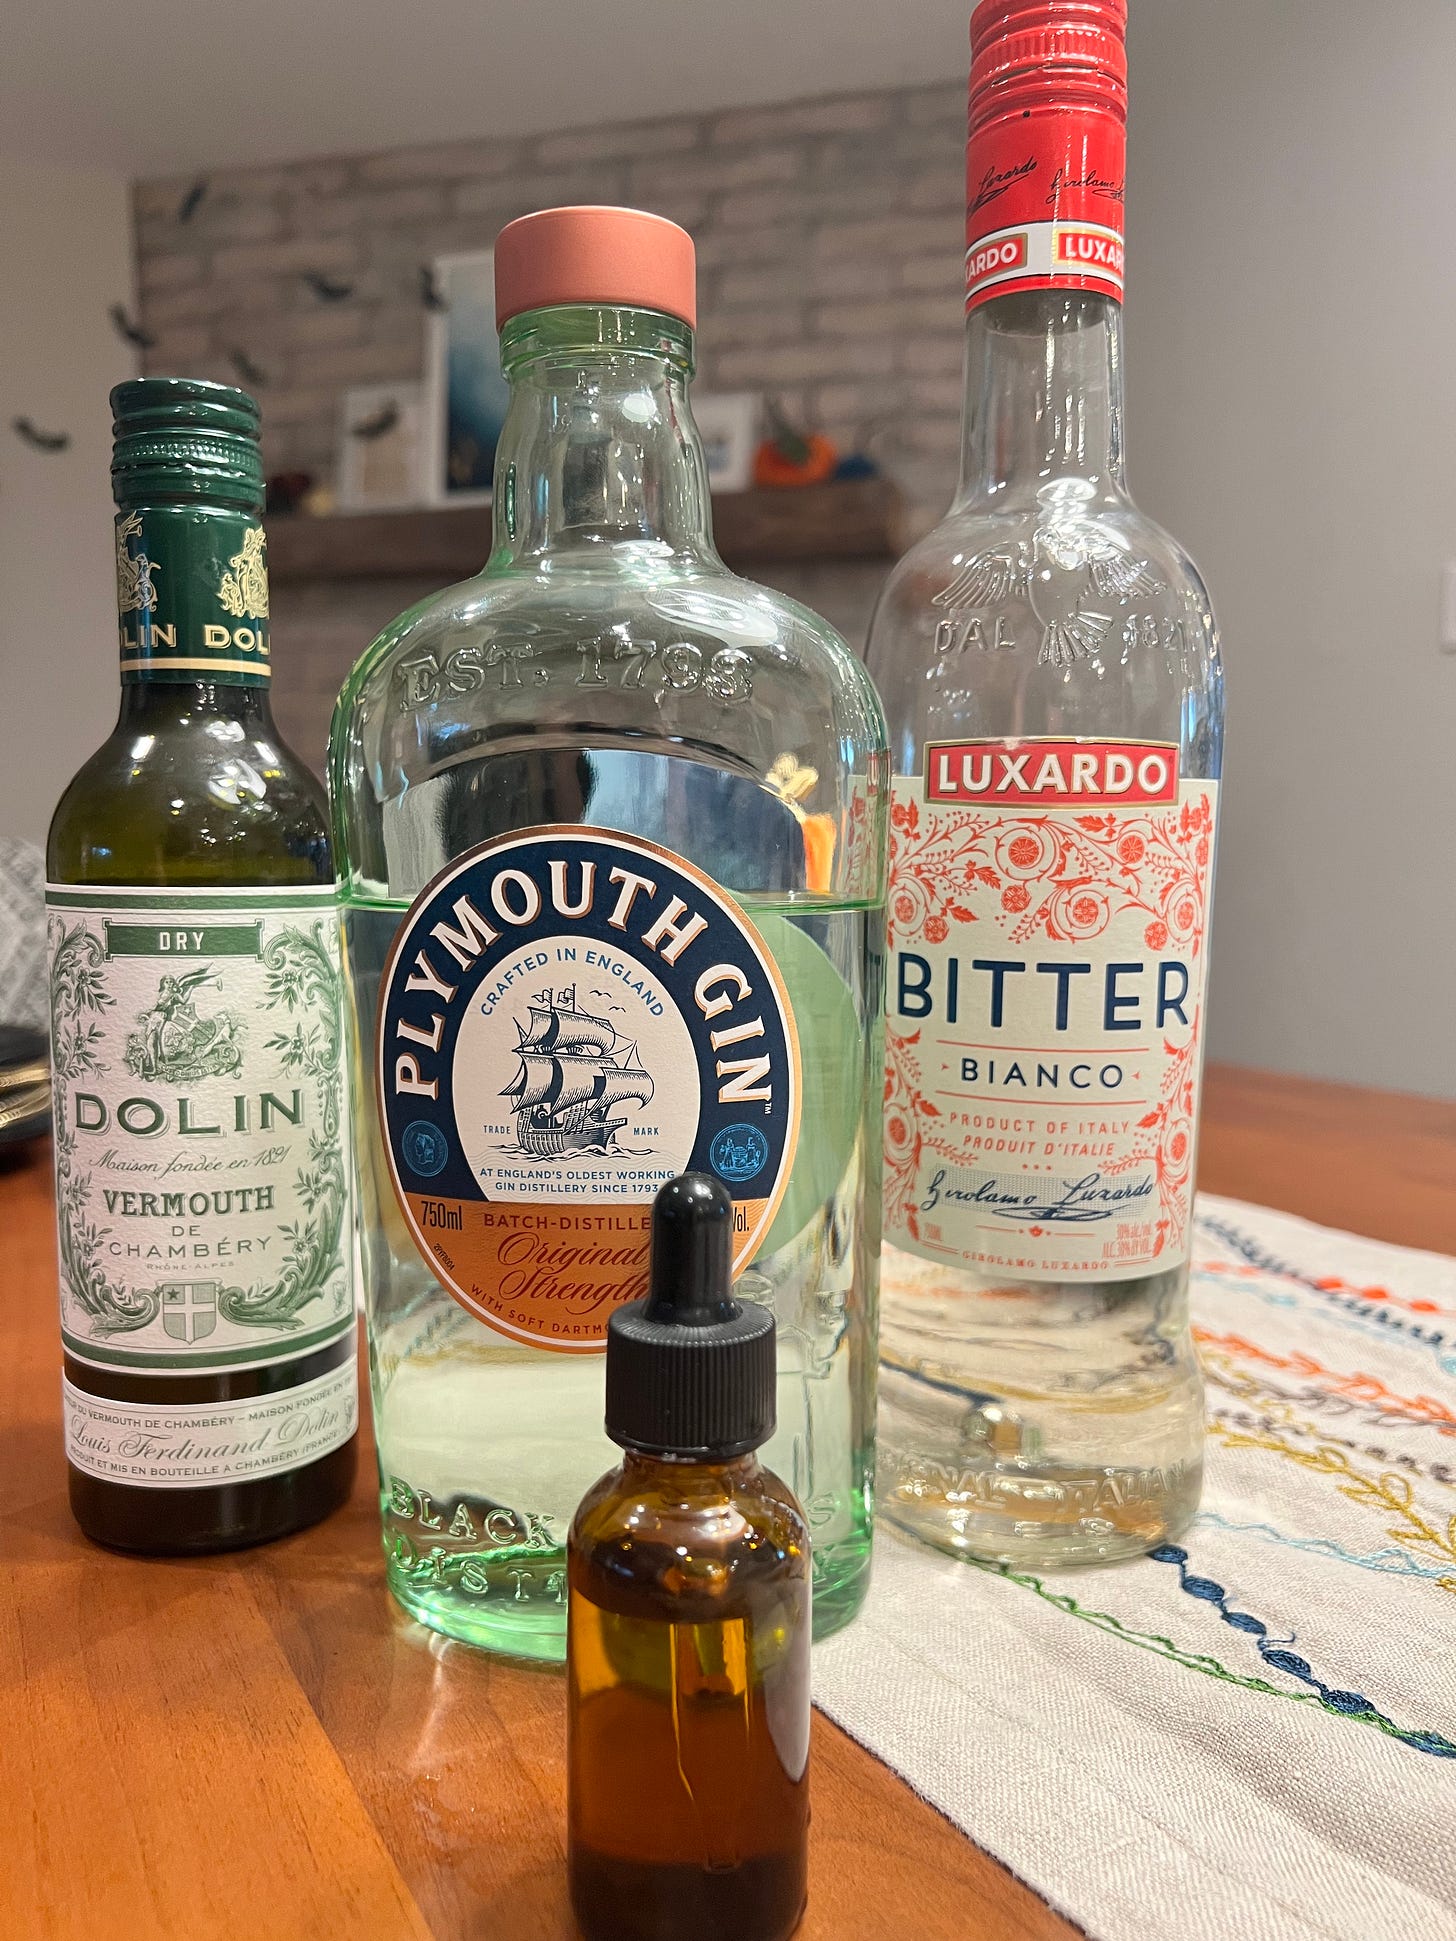 Bottles of the 4 ingredients in the cocktail: Plymouth Gin, Dolin Dry Vermouth, Luxardo Bitter Bianco, and saline solution